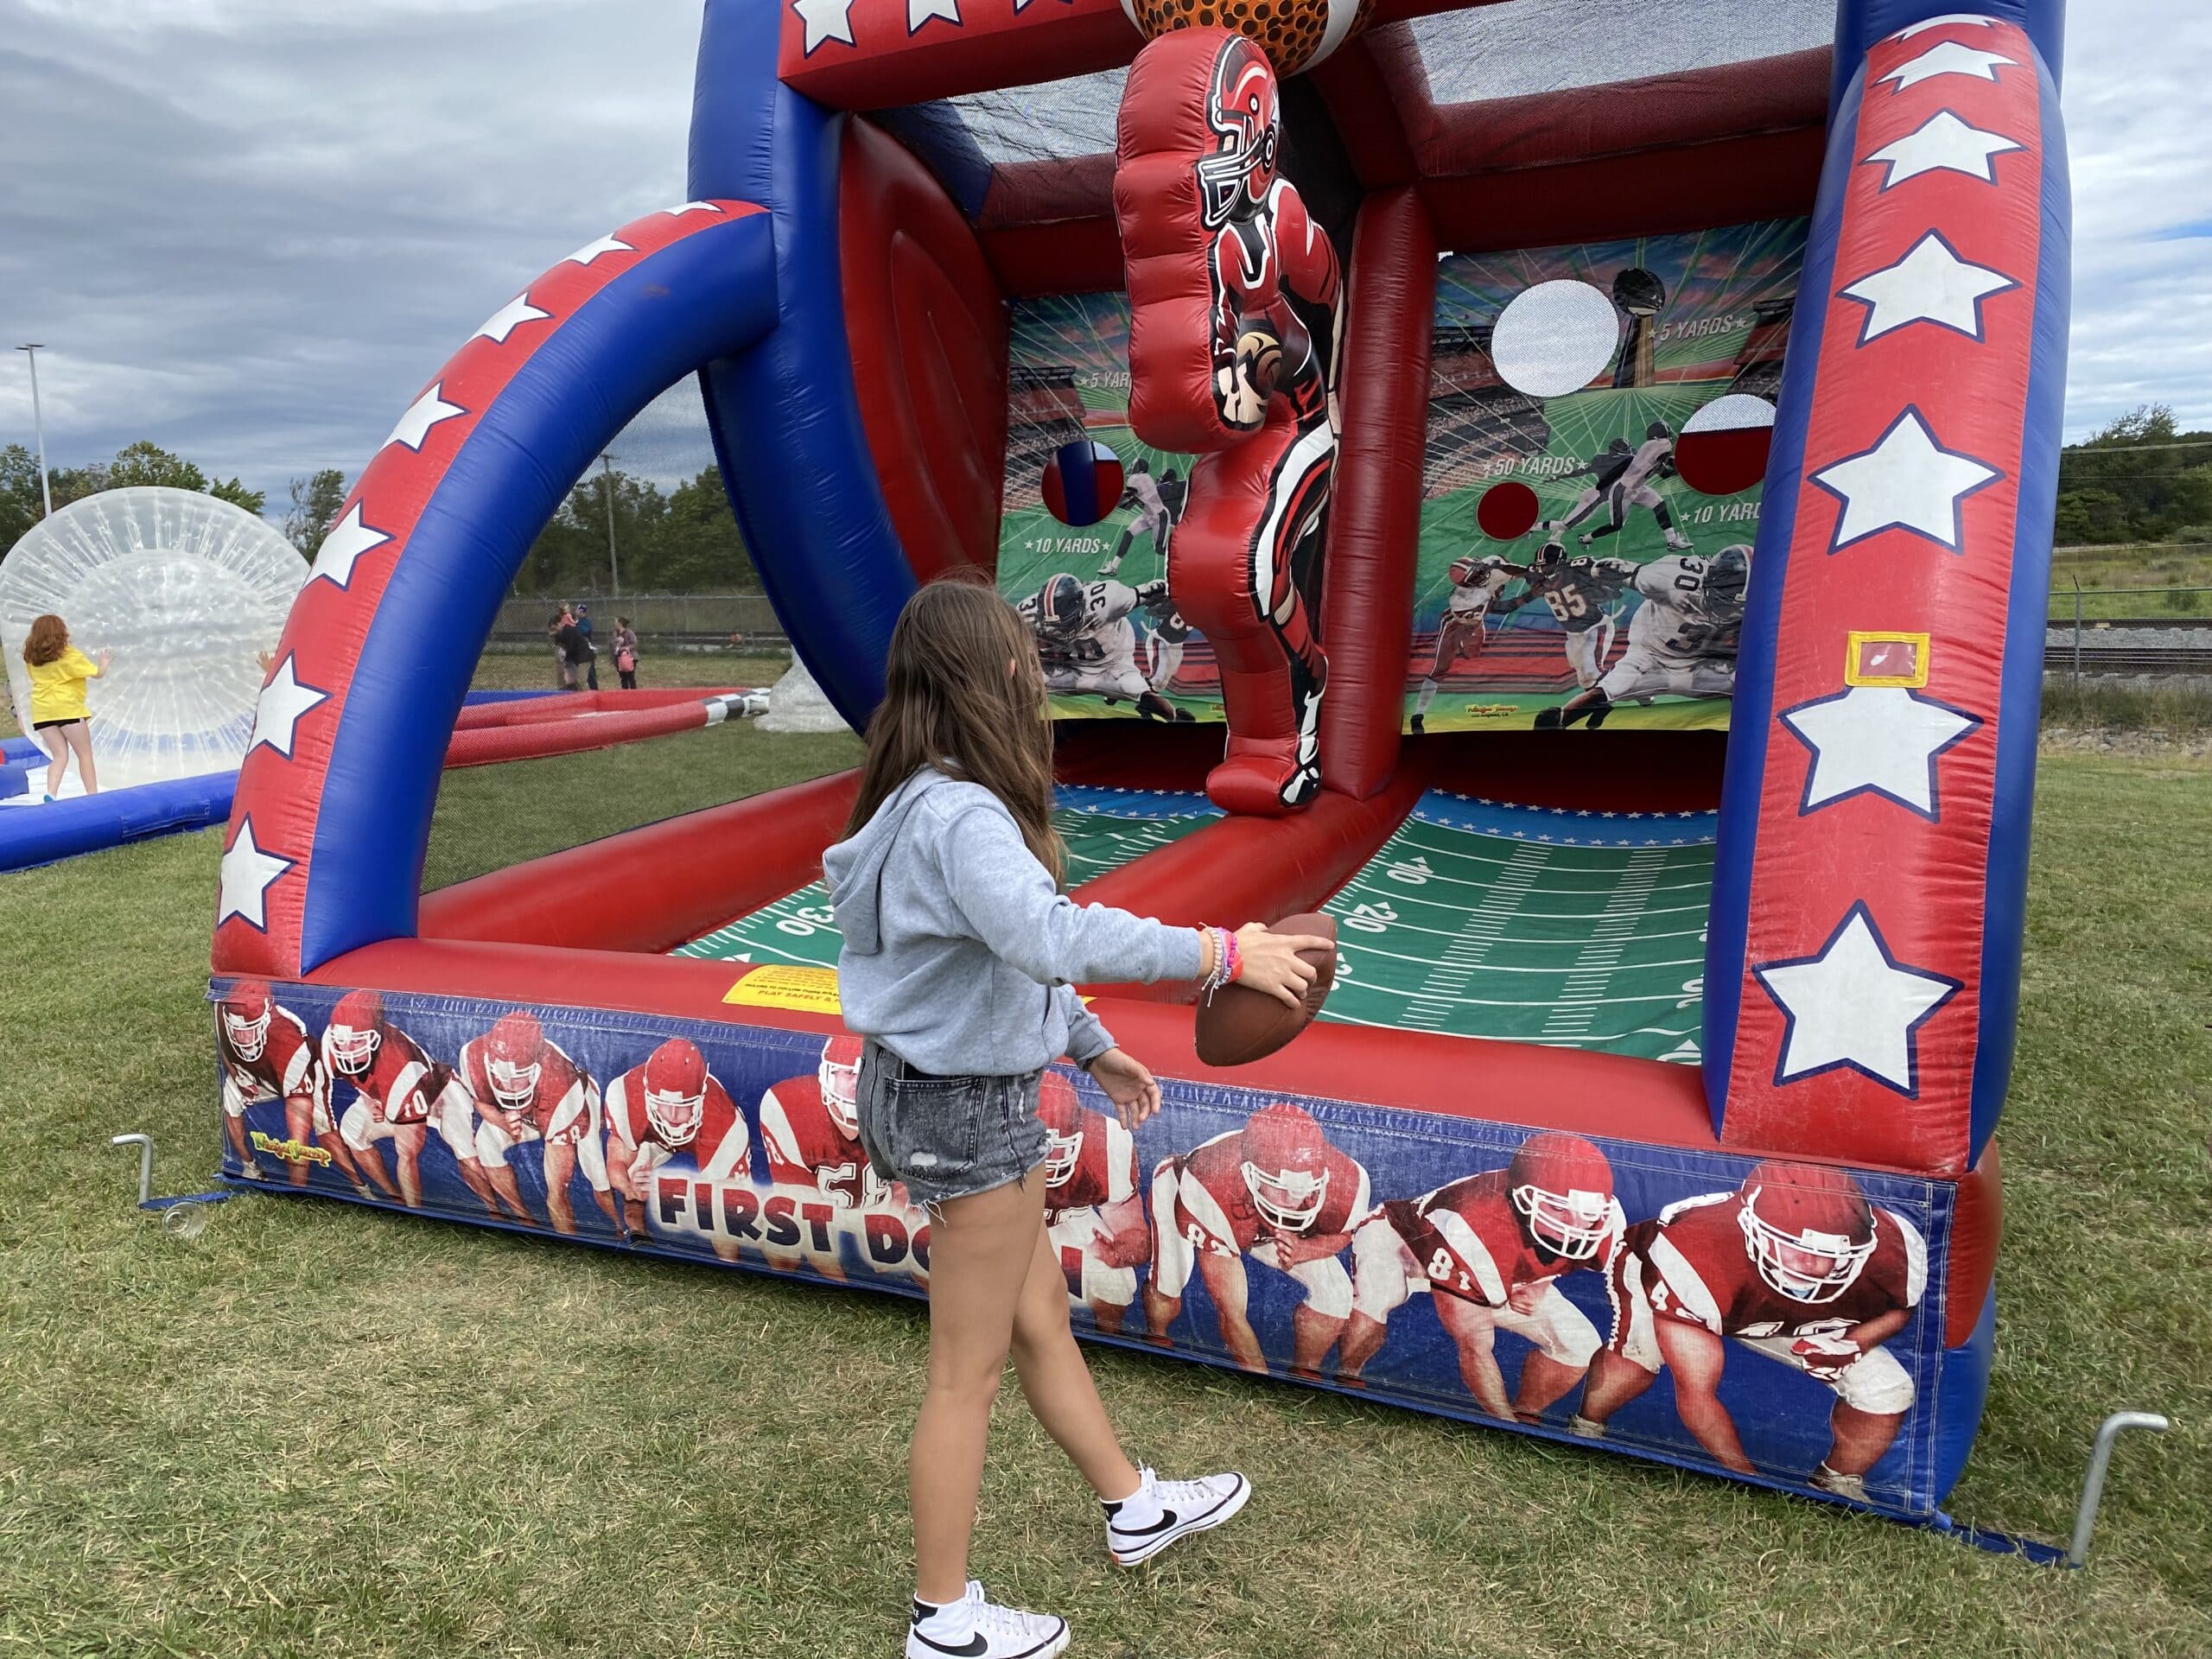 Girl preparing to throw a ball in a football inflatable game with vivid colors.